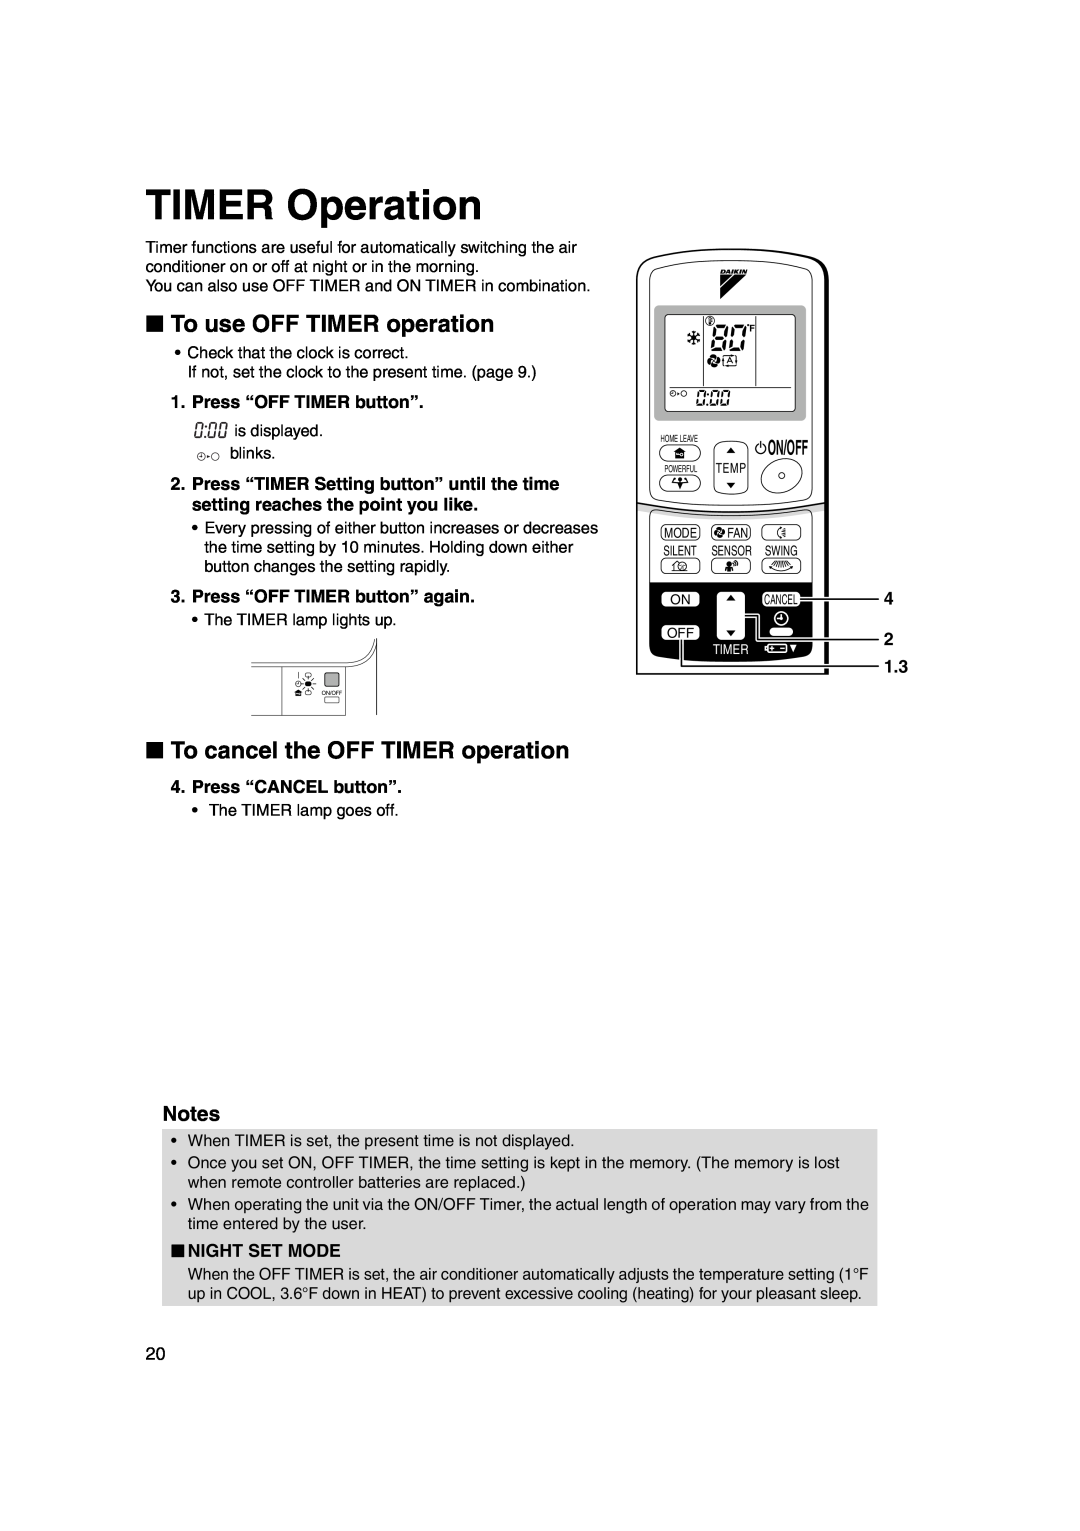 Trane FTXS18DVJU TIMER Operation, To use OFF TIMER operation, To cancel the OFF TIMER operation, Press “OFF TIMER button” 